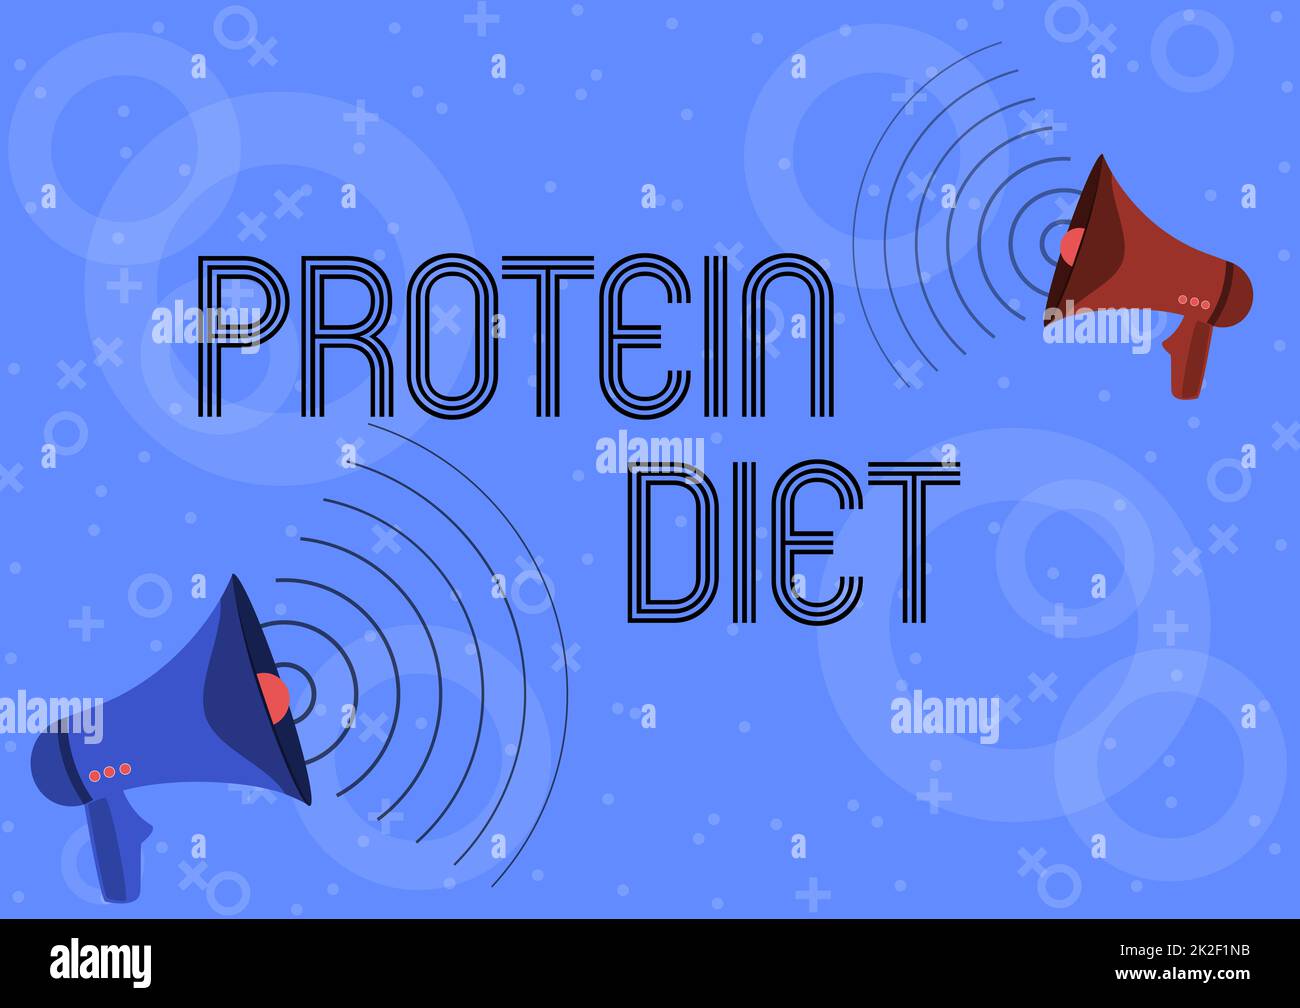 Conceptual caption Protein Diet. Business concept low in fat or carbohydrate consumption weight loss plan Pair Of Megaphones Drawing Producing Sound Waves Making Announcement. Stock Photo